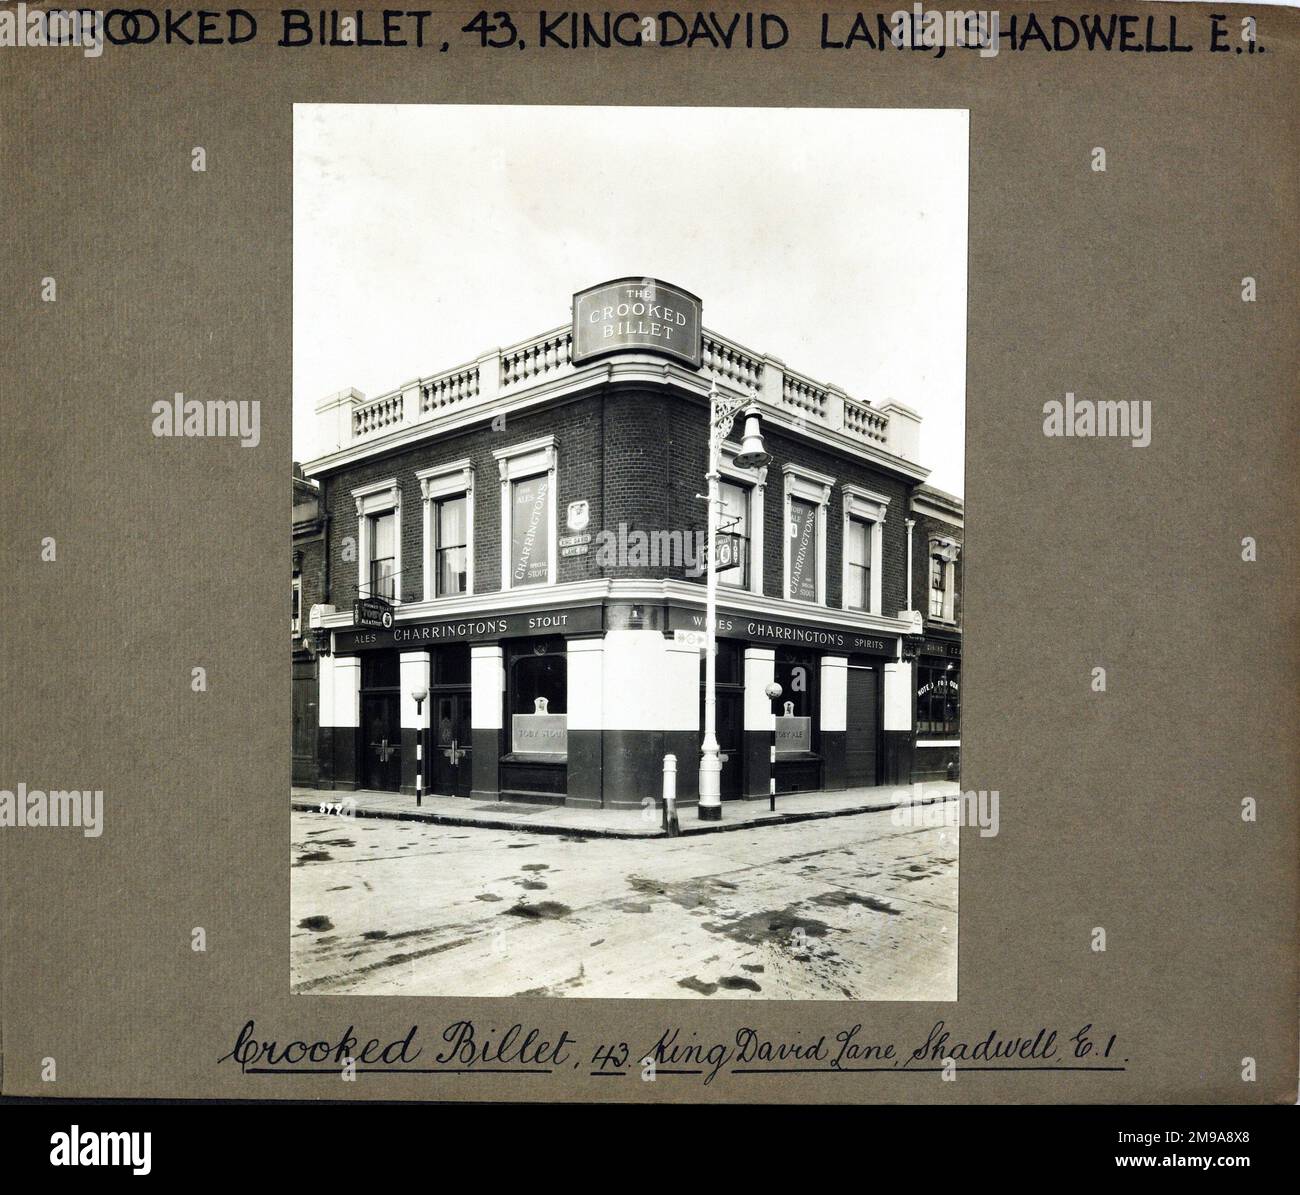 Photograph of Crooked Billet PH, Shadwell, London. The main side of the print (shown here) depicts: Corner on view of the pub.  The back of the print (available on request) details: Nothing for the Crooked Billet, Shadwell, London E1 0DY. As of July 2018 . Demolished Stock Photo